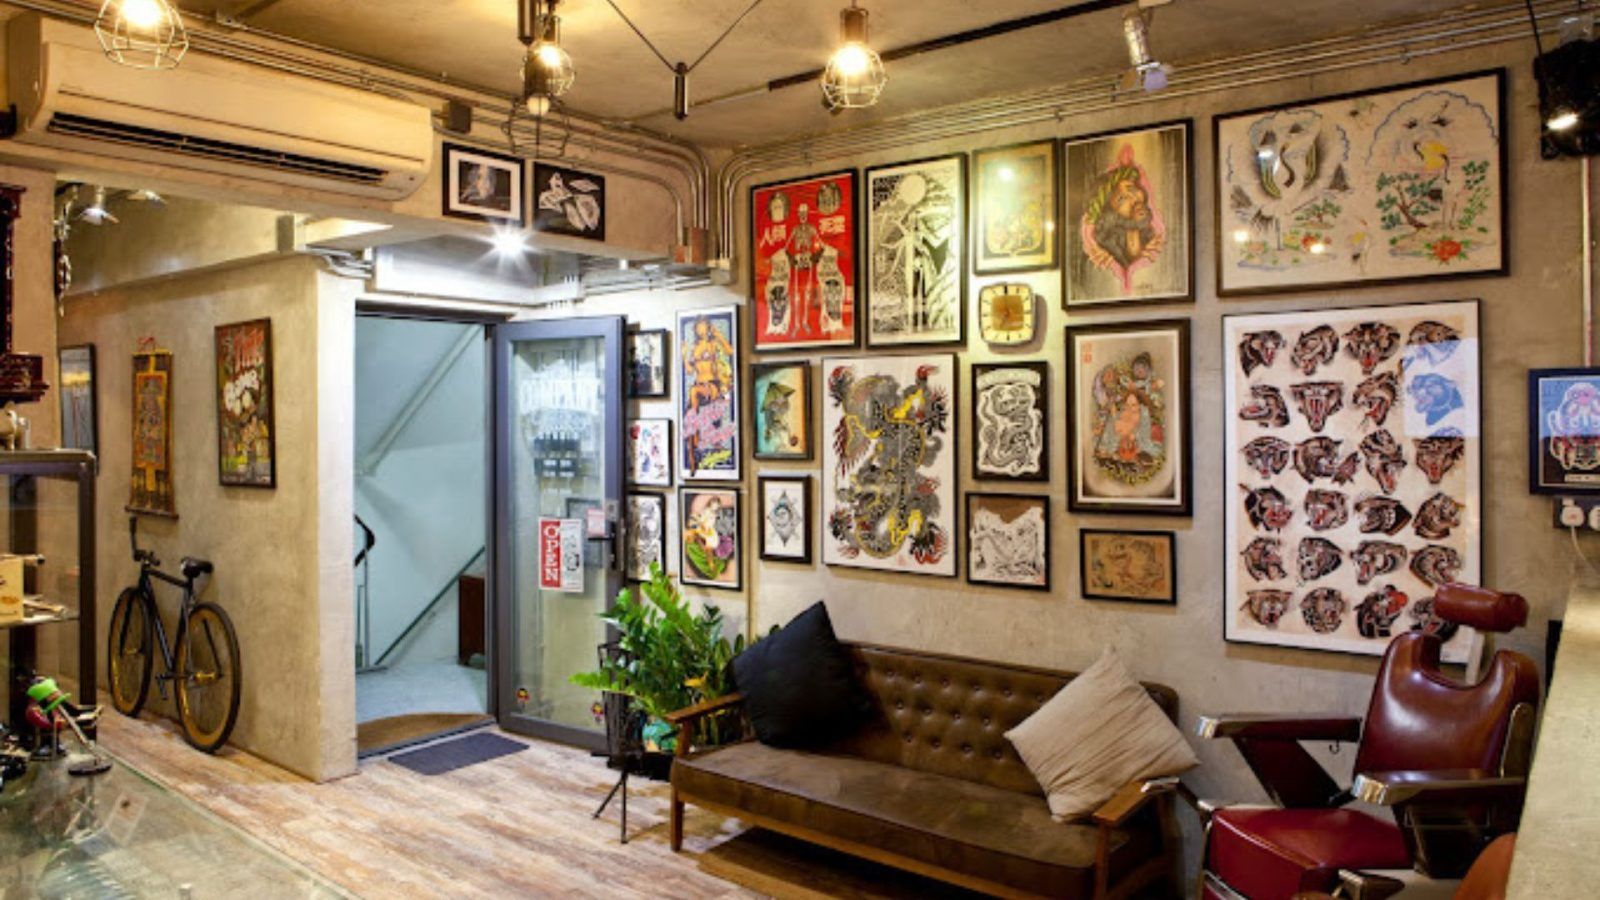 Tattoo Studios Bali: Where To Find The 16 Best Tattoo Artists On The Island